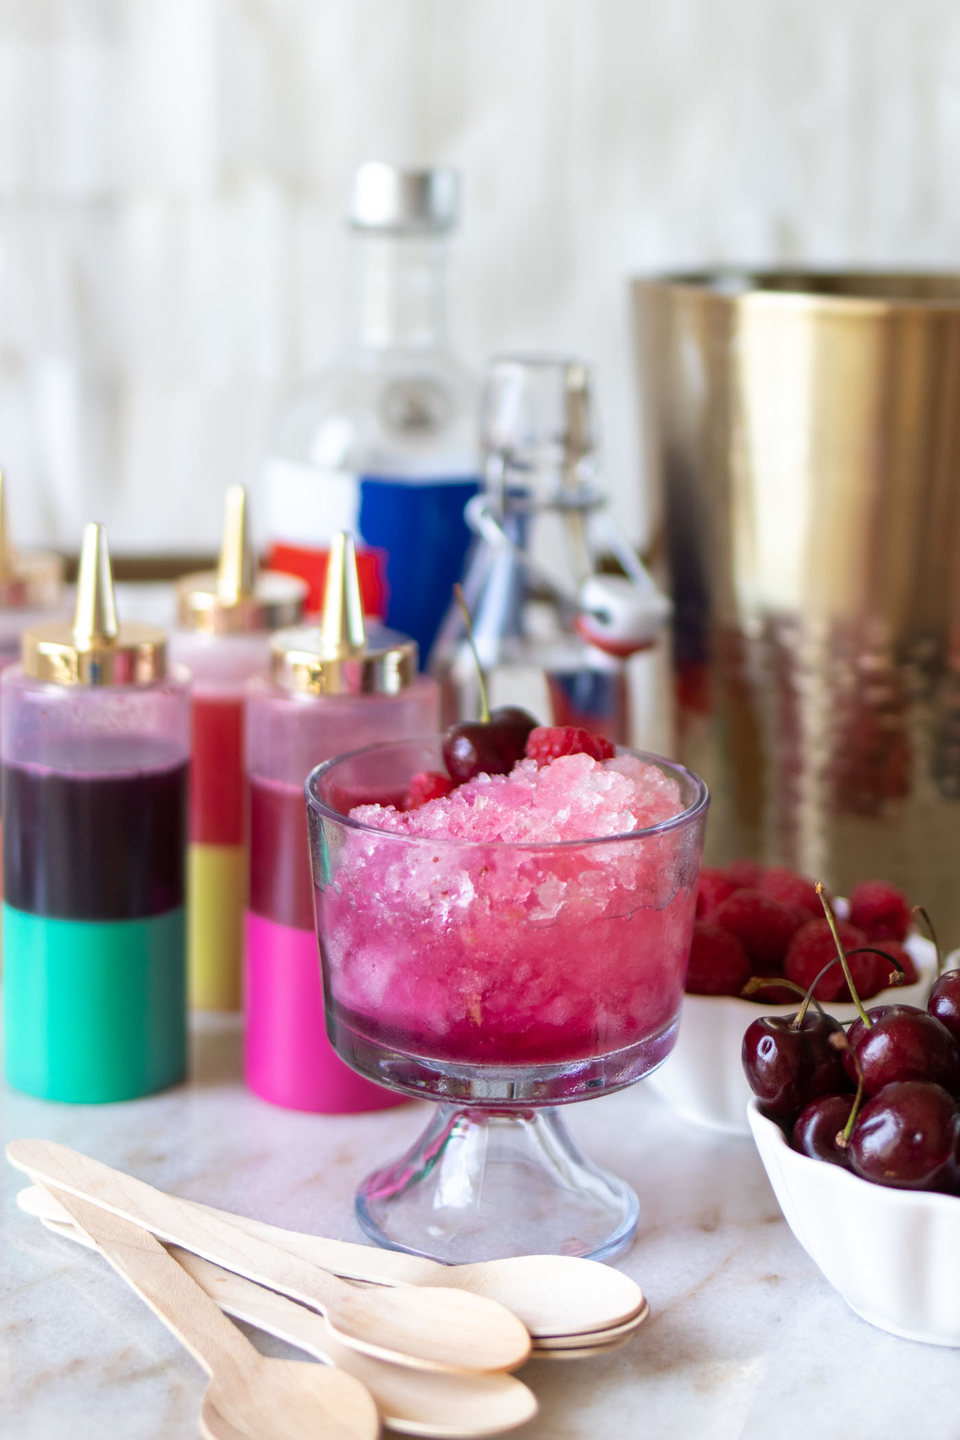 <p>Elevate your at-home cocktail hour with a summertime sipper fit for a balmy night, like this boozy take on snow cones. </p><p><strong>Get the tutorial at <a href="https://www.clubcrafted.com/boozy-snow-cones-real-fruit-snow-cone-syrups/" rel="nofollow noopener" target="_blank" data-ylk="slk:Club Crafted" class="link ">Club Crafted</a>.</strong></p>